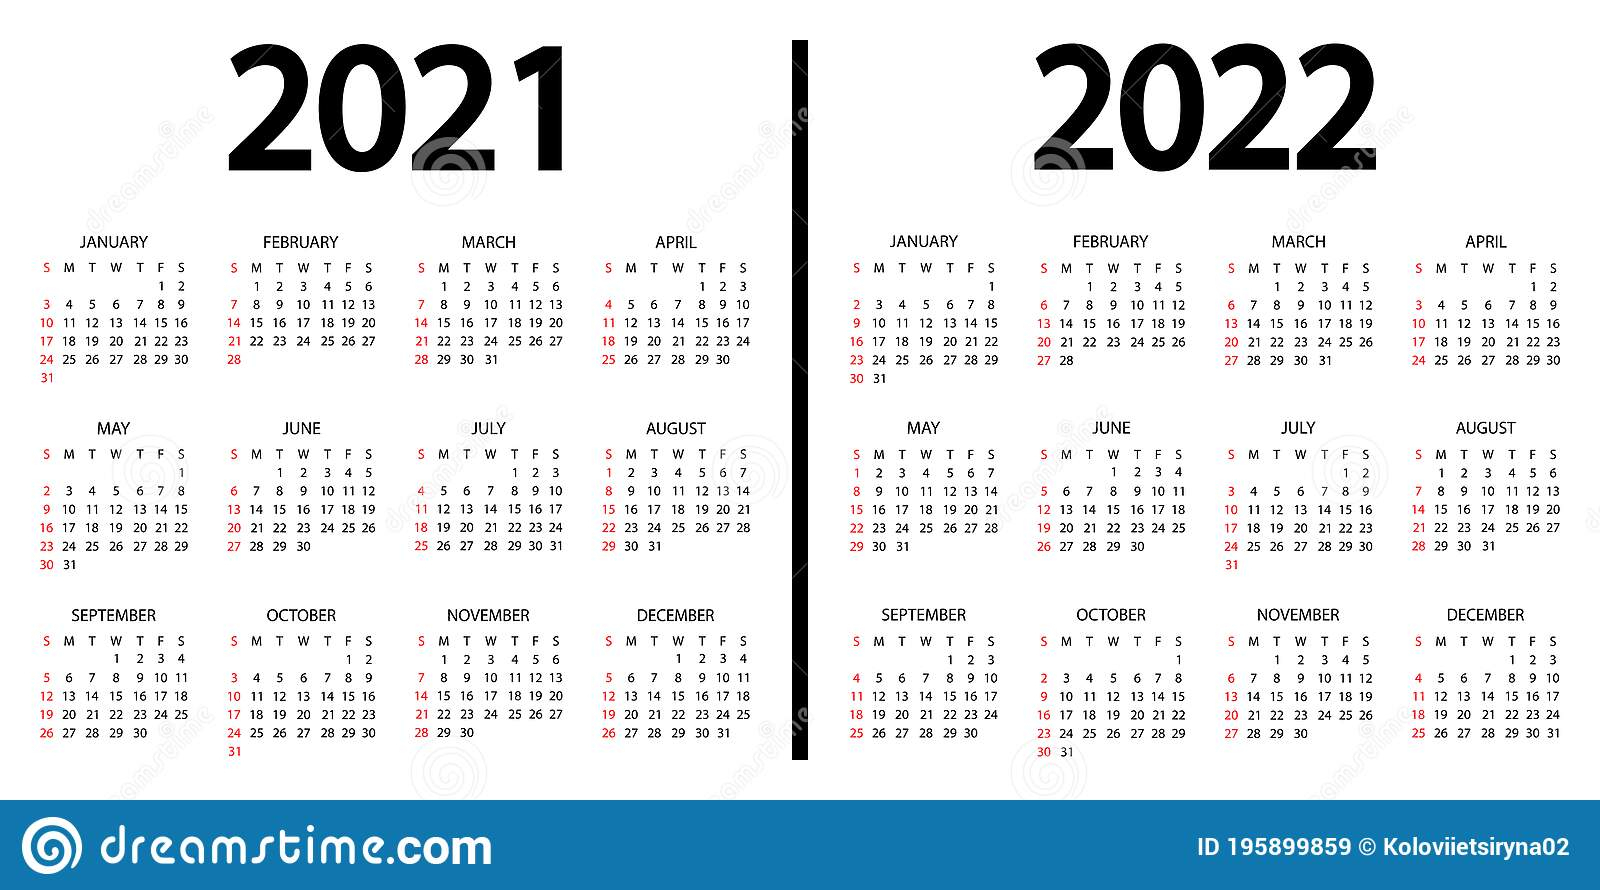 Calendar 2021-2022. The Week Starts On Sunday. 2021 And